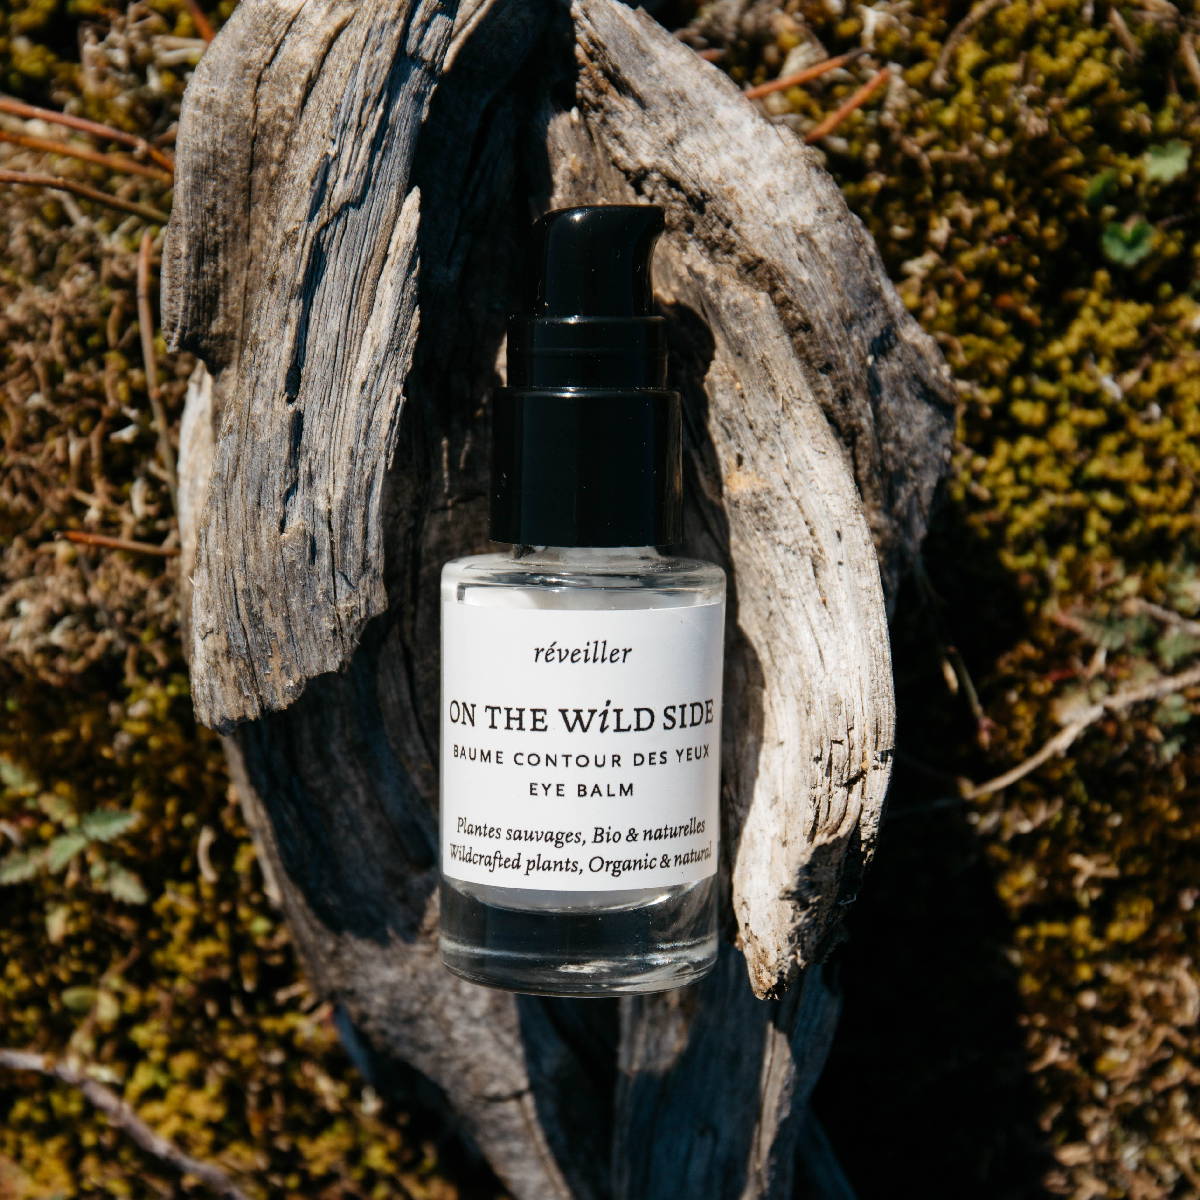 Baume contour des yeux 15ml – On The Wild Side